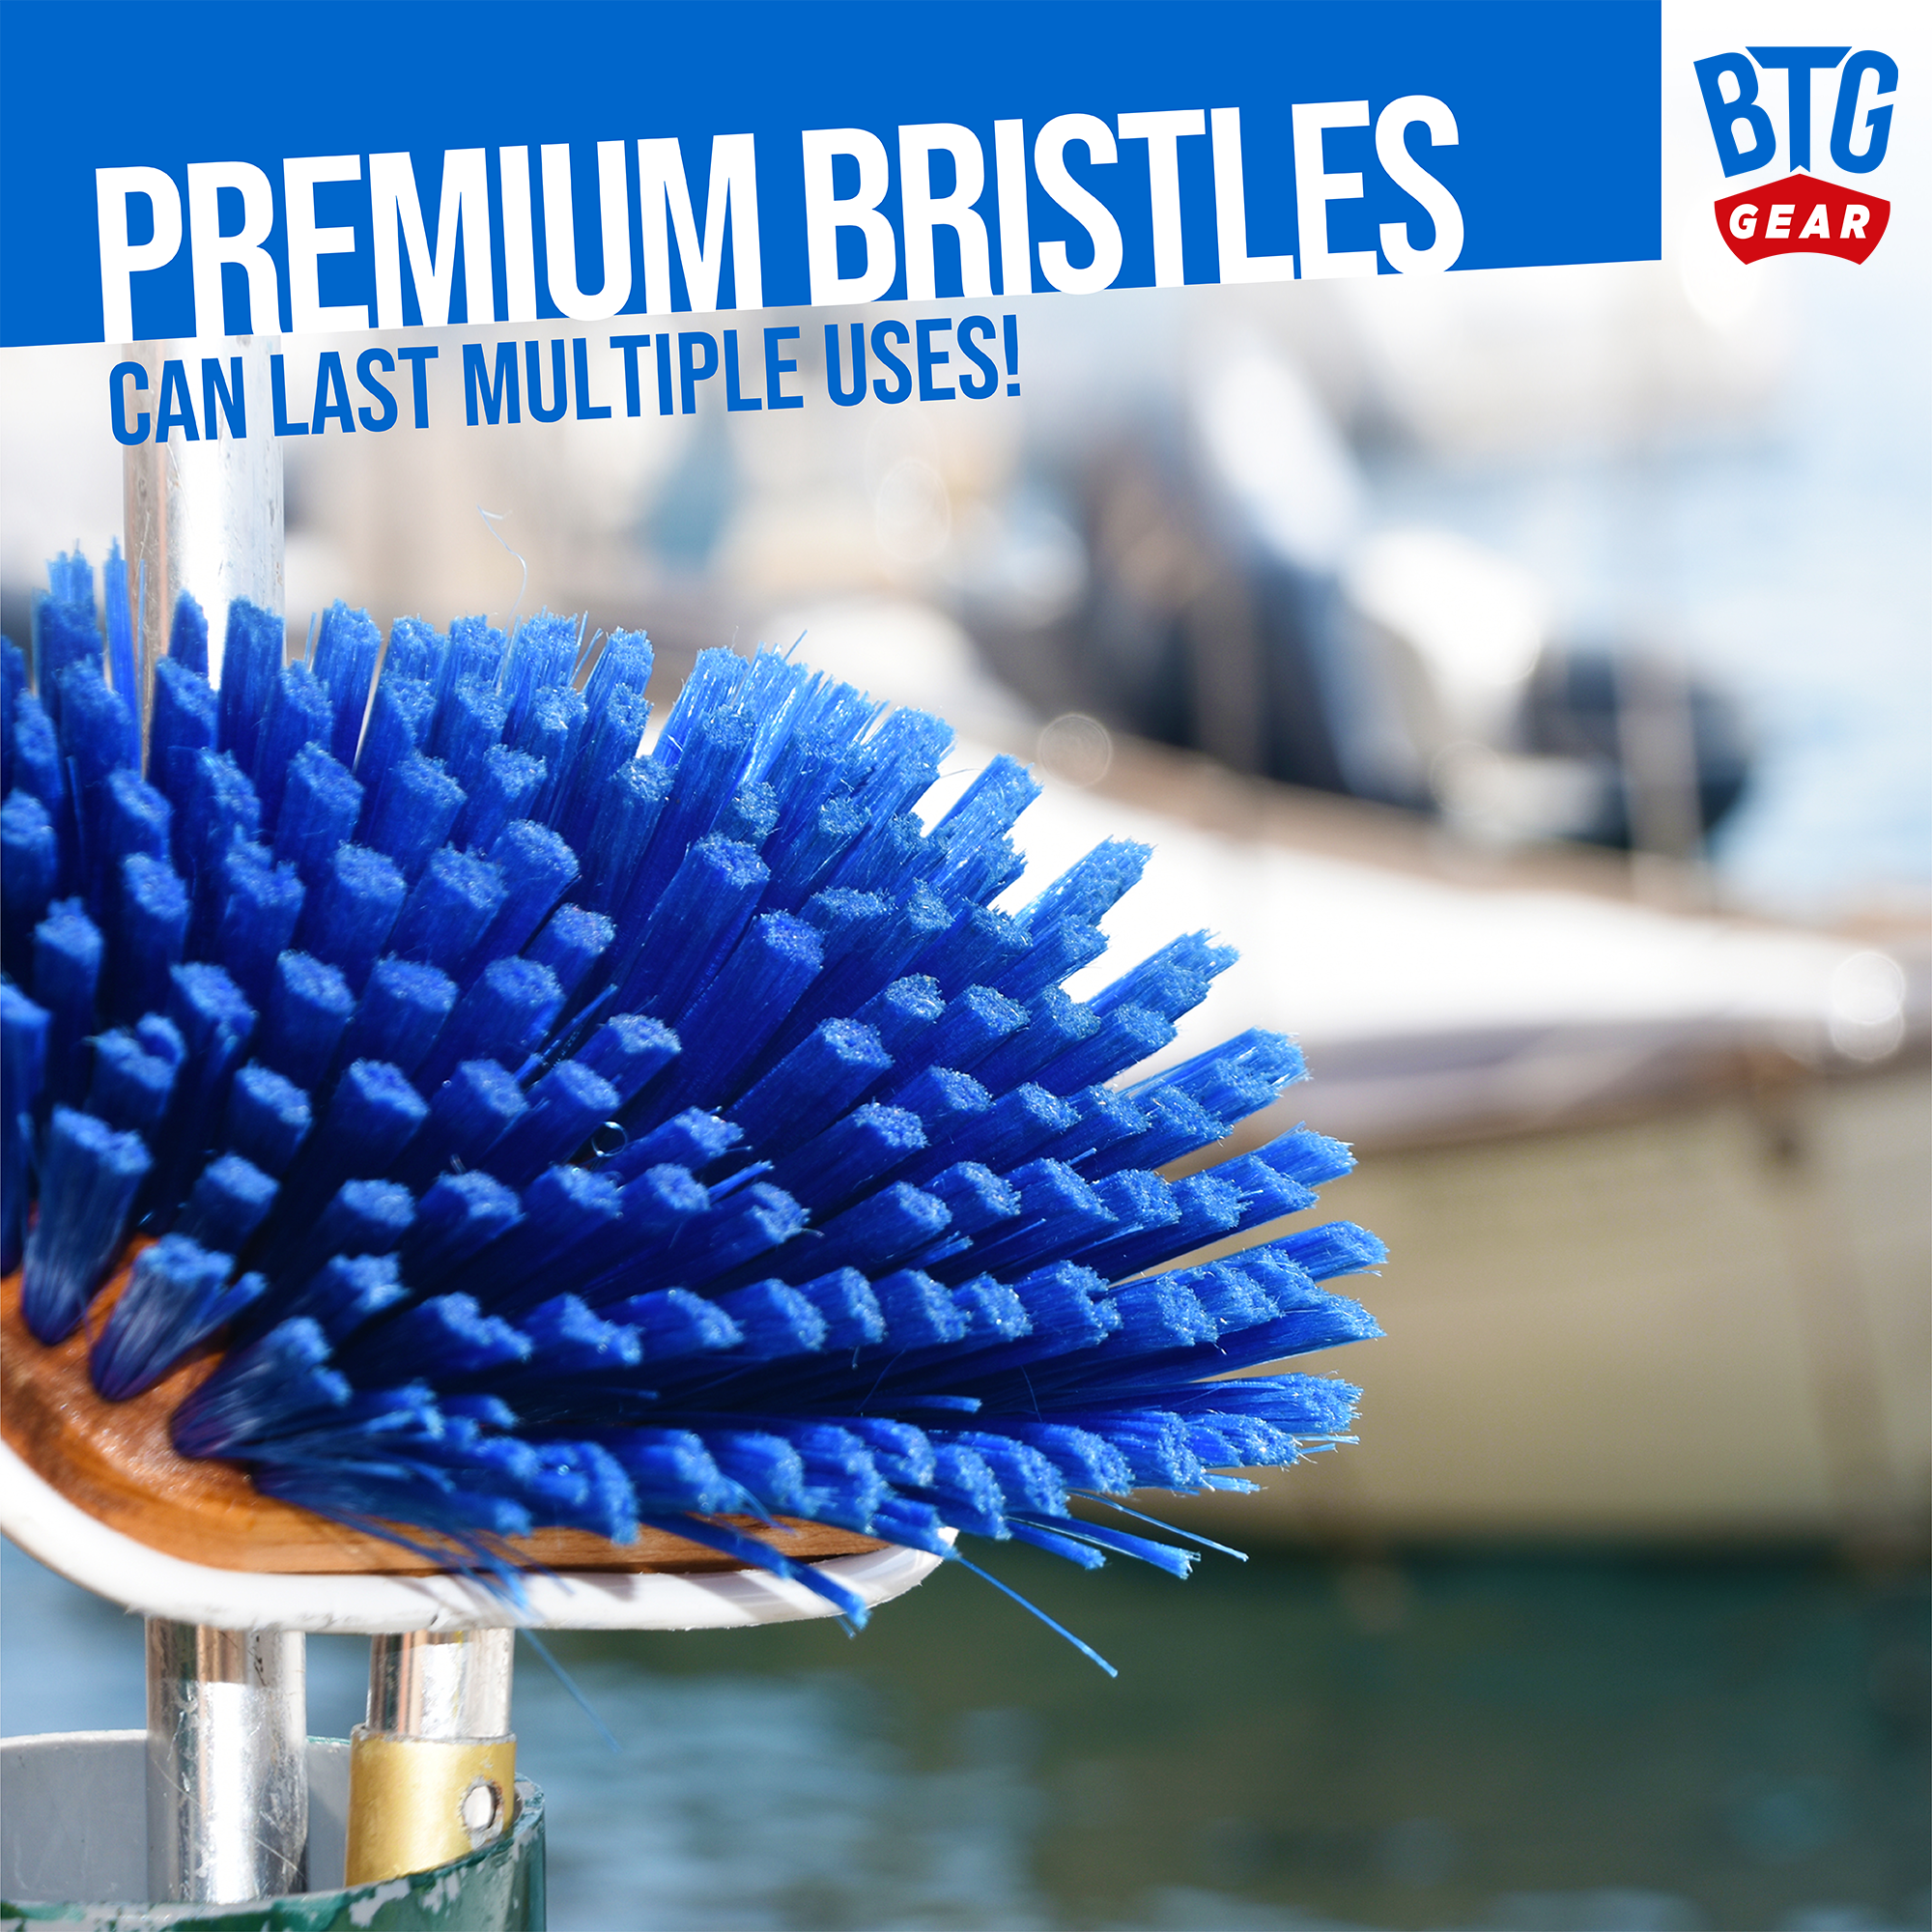 BTG Gear Medium Thickness Snap Button Boat Deck Brush for Cleaning